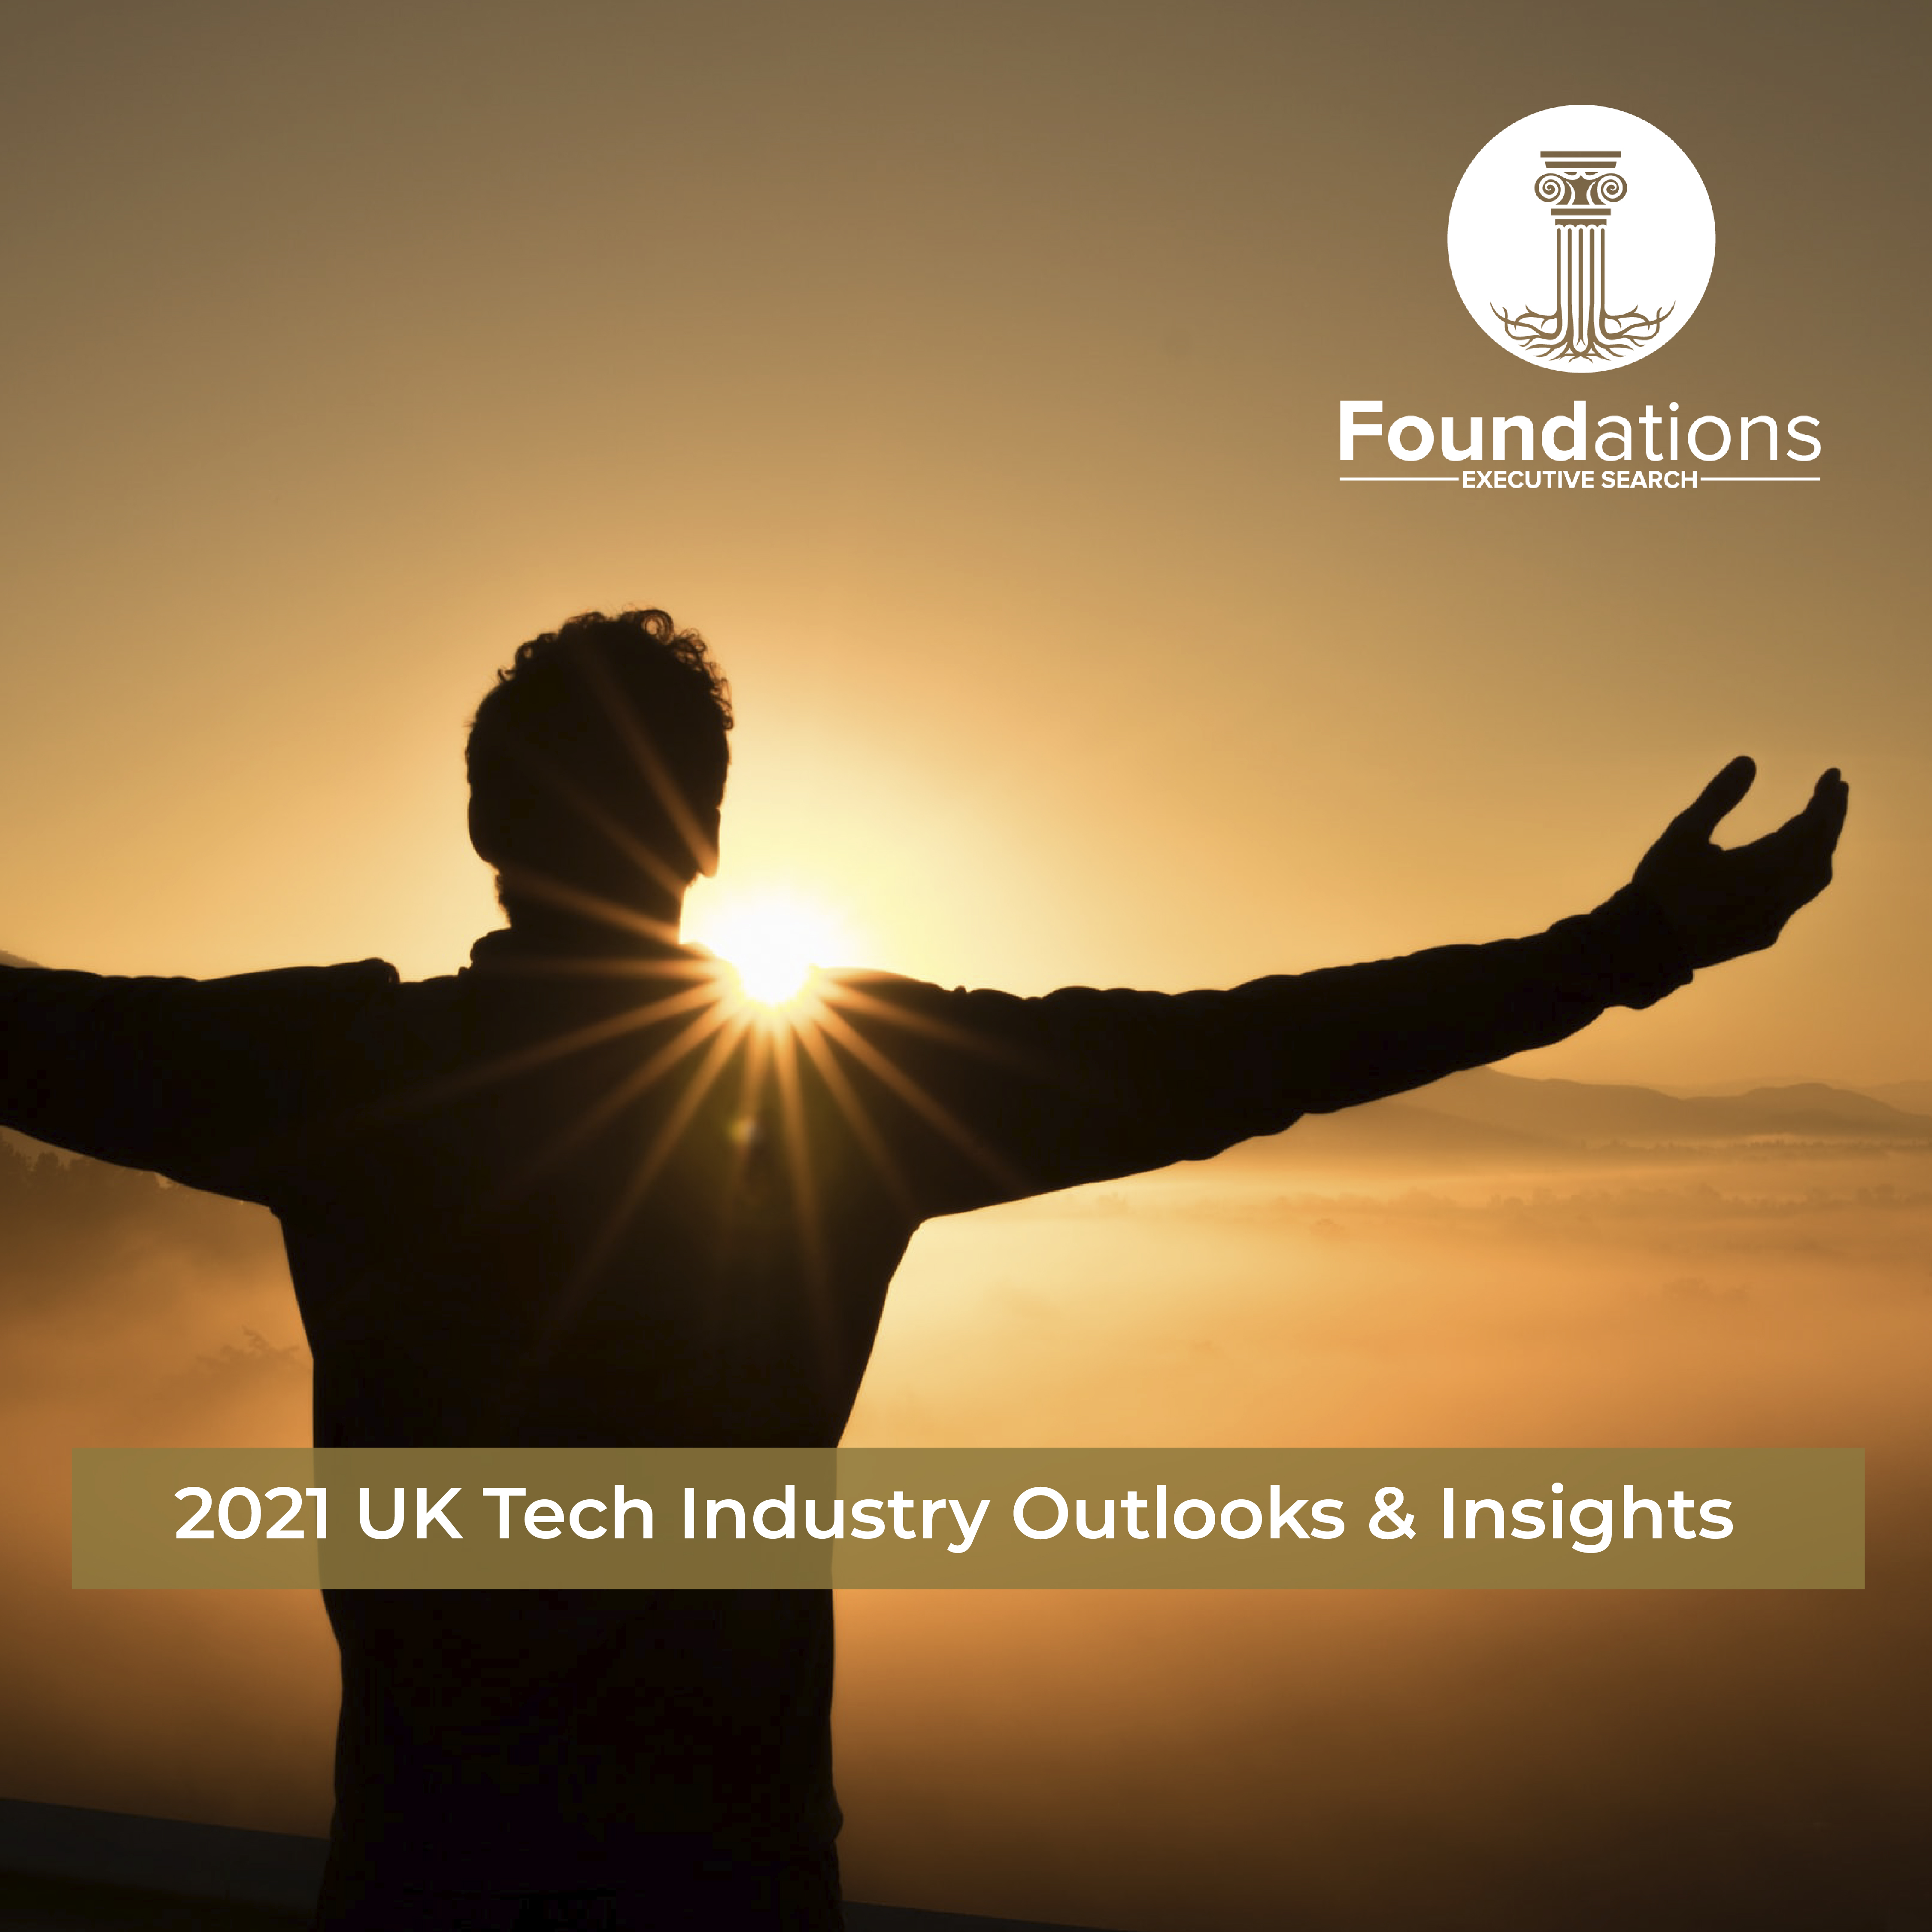 2021 UK Tech Industry Outlook & Insights